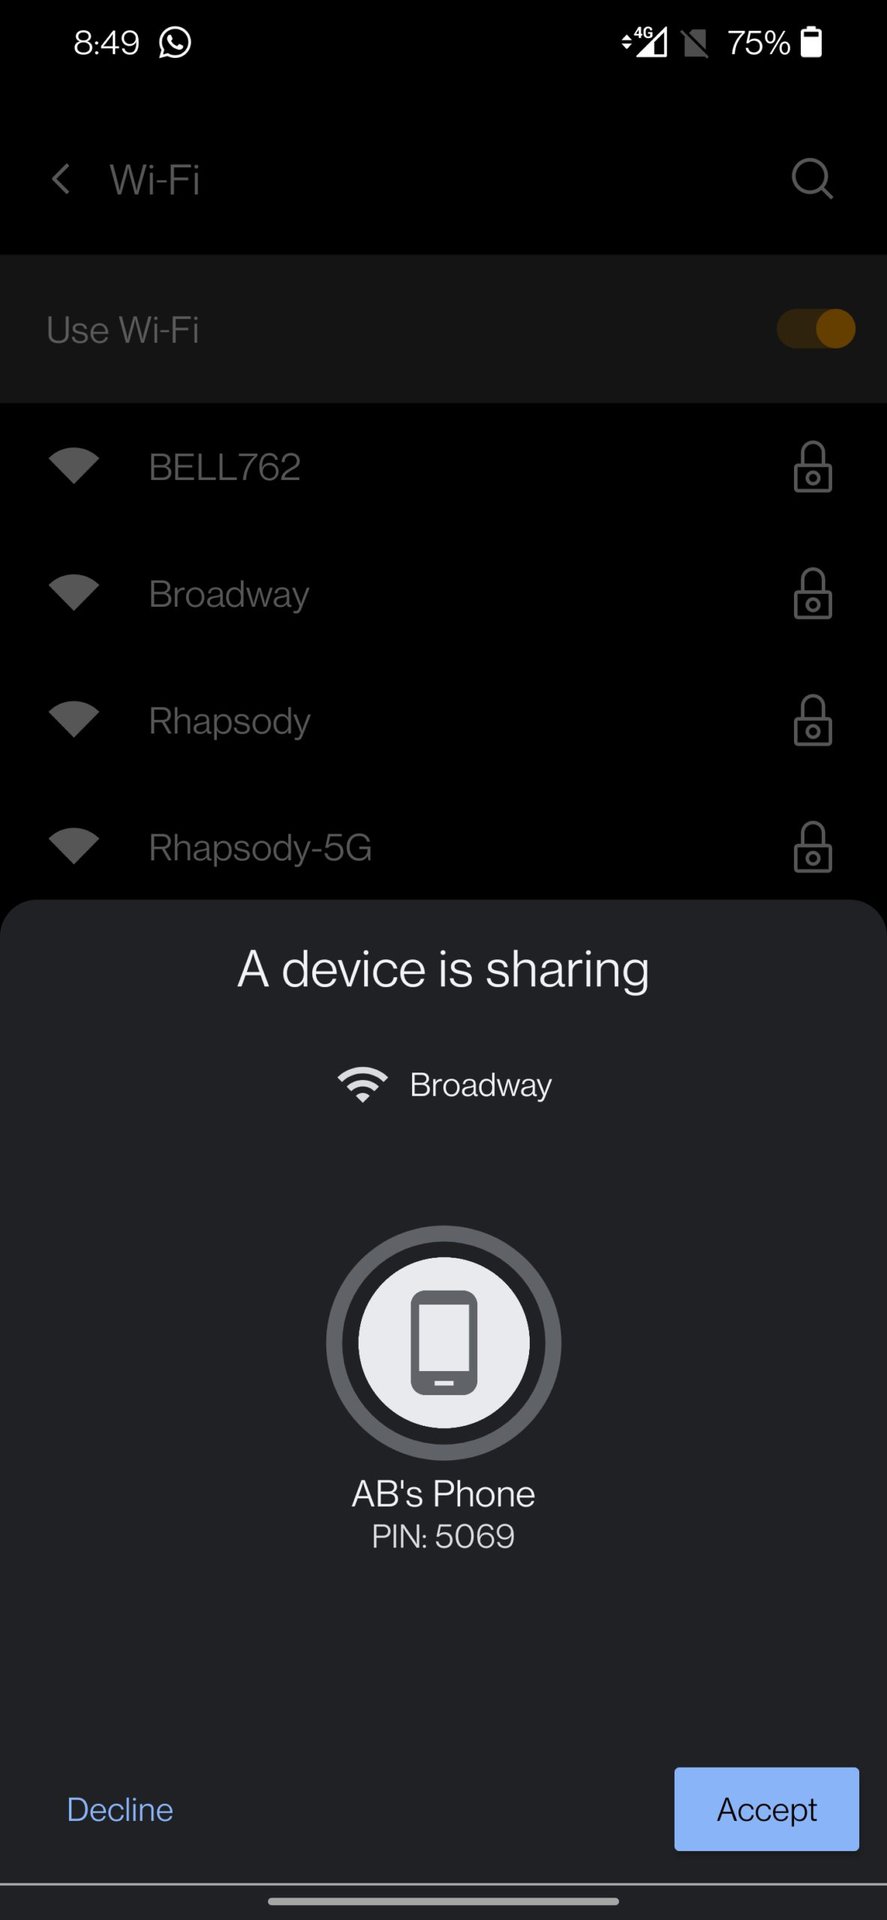 Share nearby accept request to share Wi-Fi password on another phone